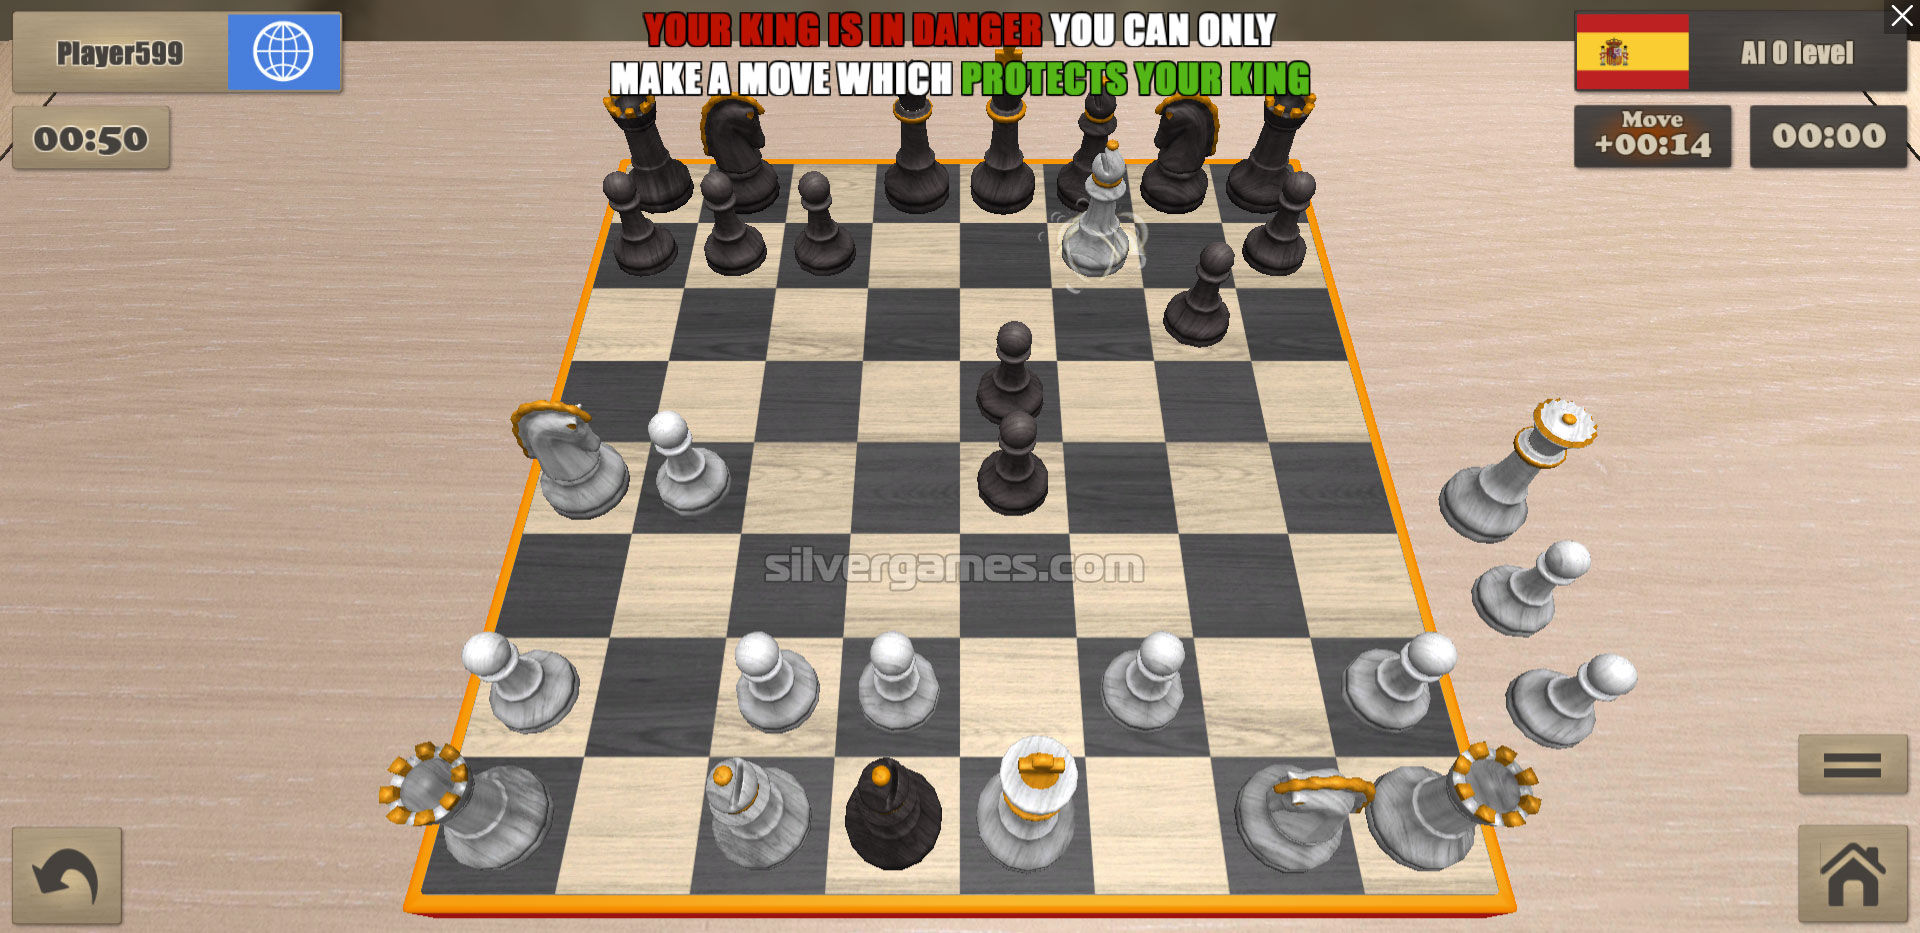 Real Chess Online 3D - Play Online on SilverGames 🕹️